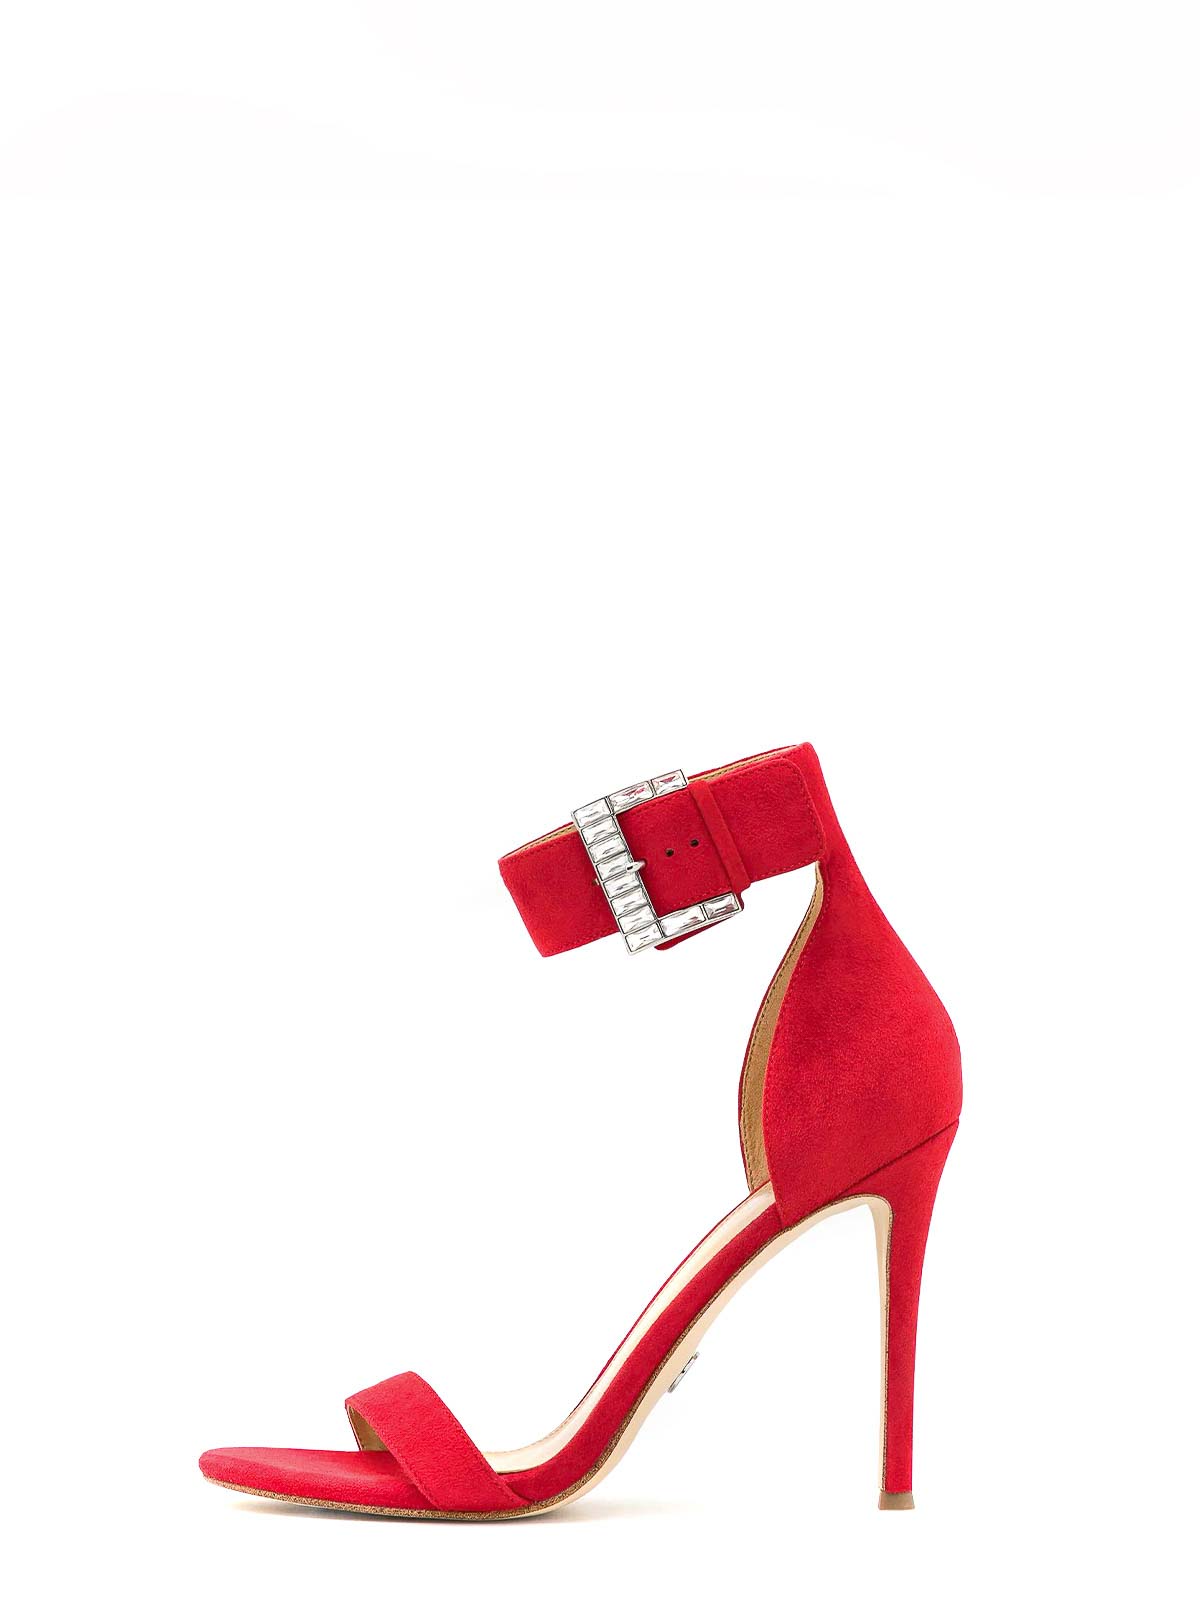 Shop Michael Kors Stiletto Sandals In Red